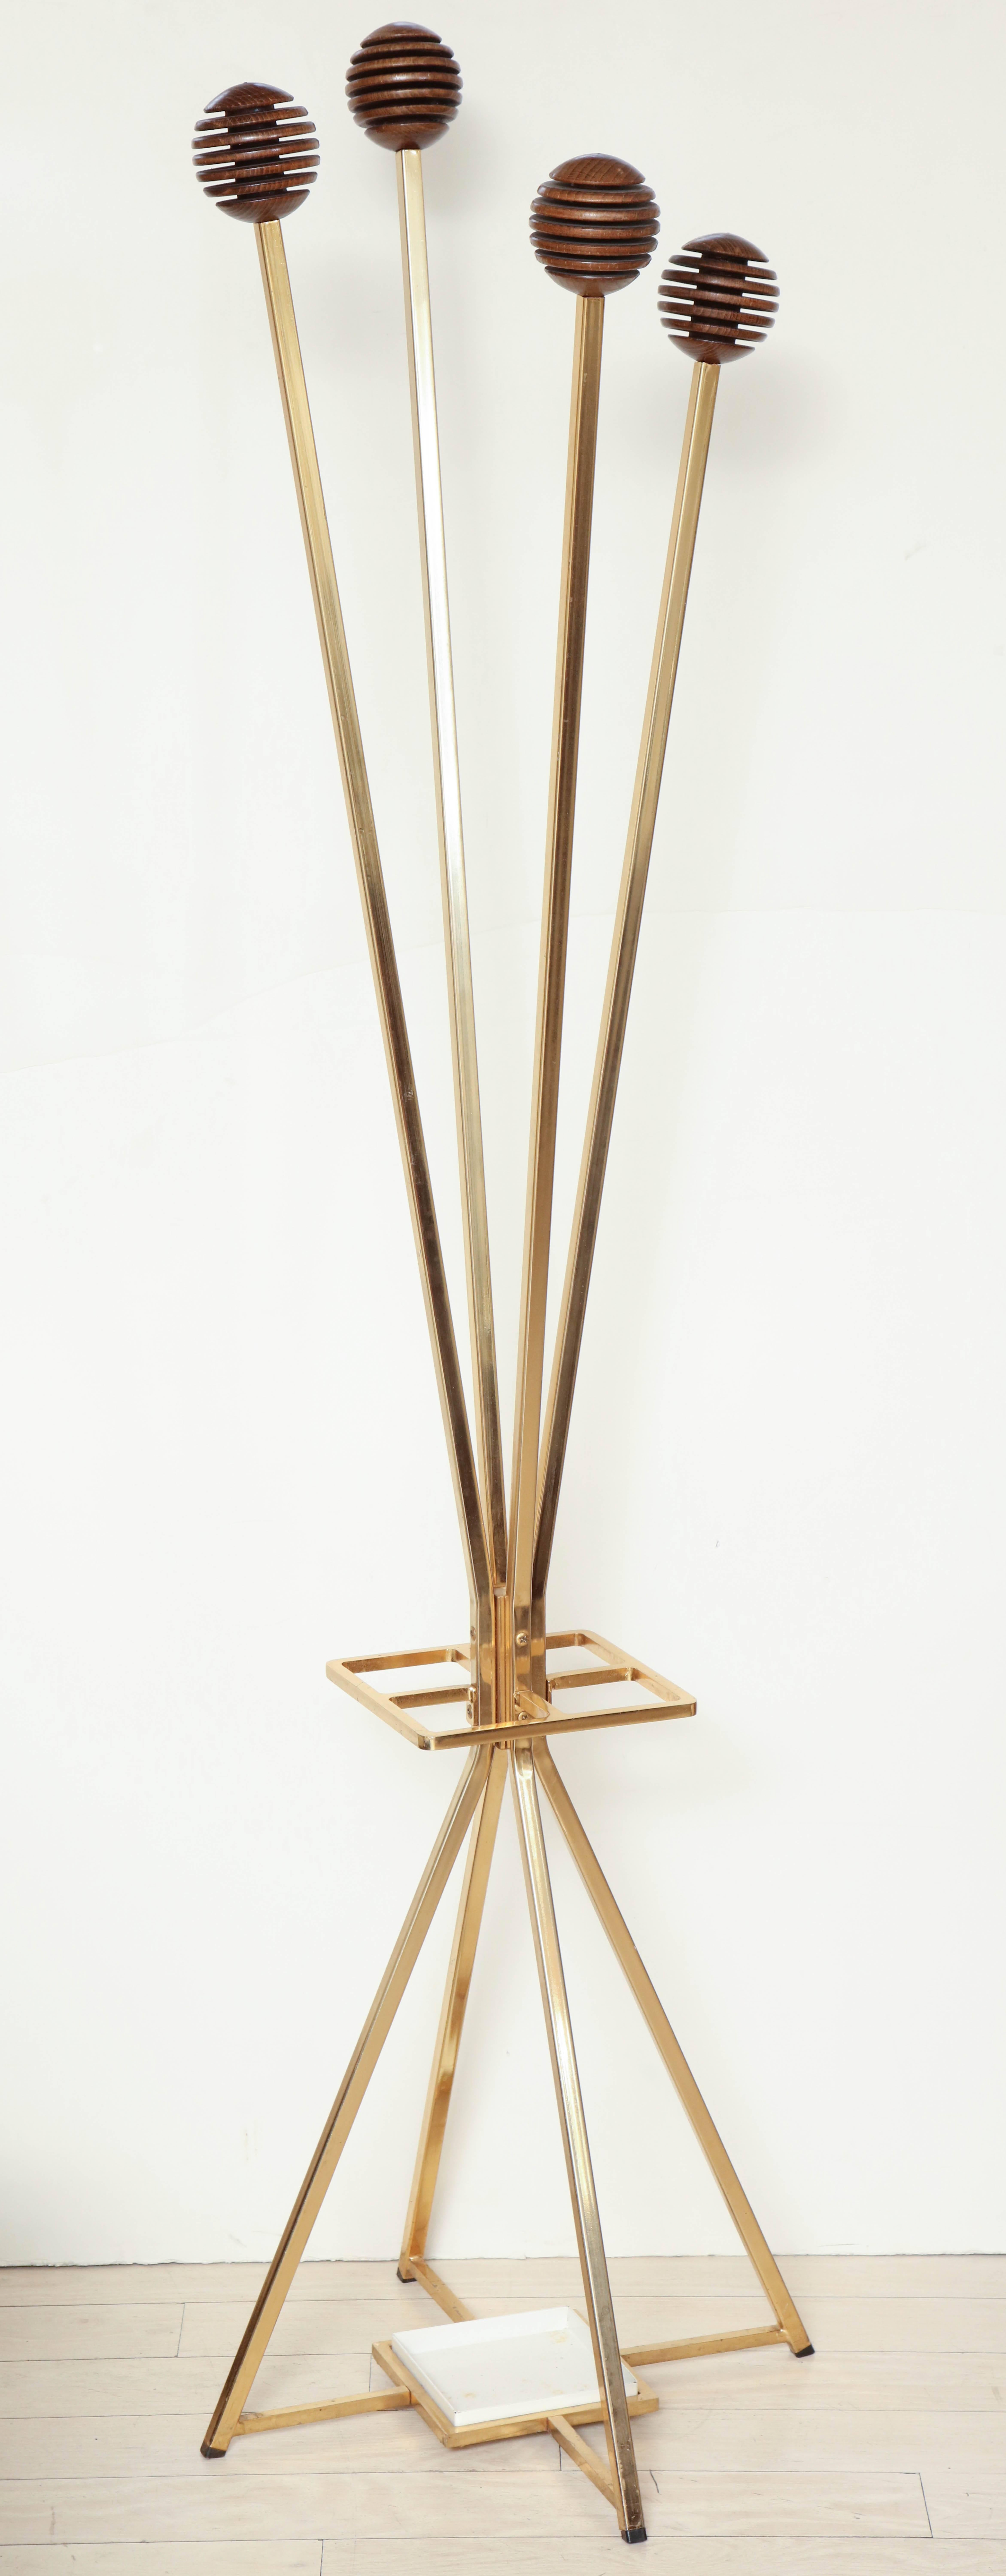 Interesting brass and wood umbrella stand / coat rack with bee hive form pegs, France, circa 1970.